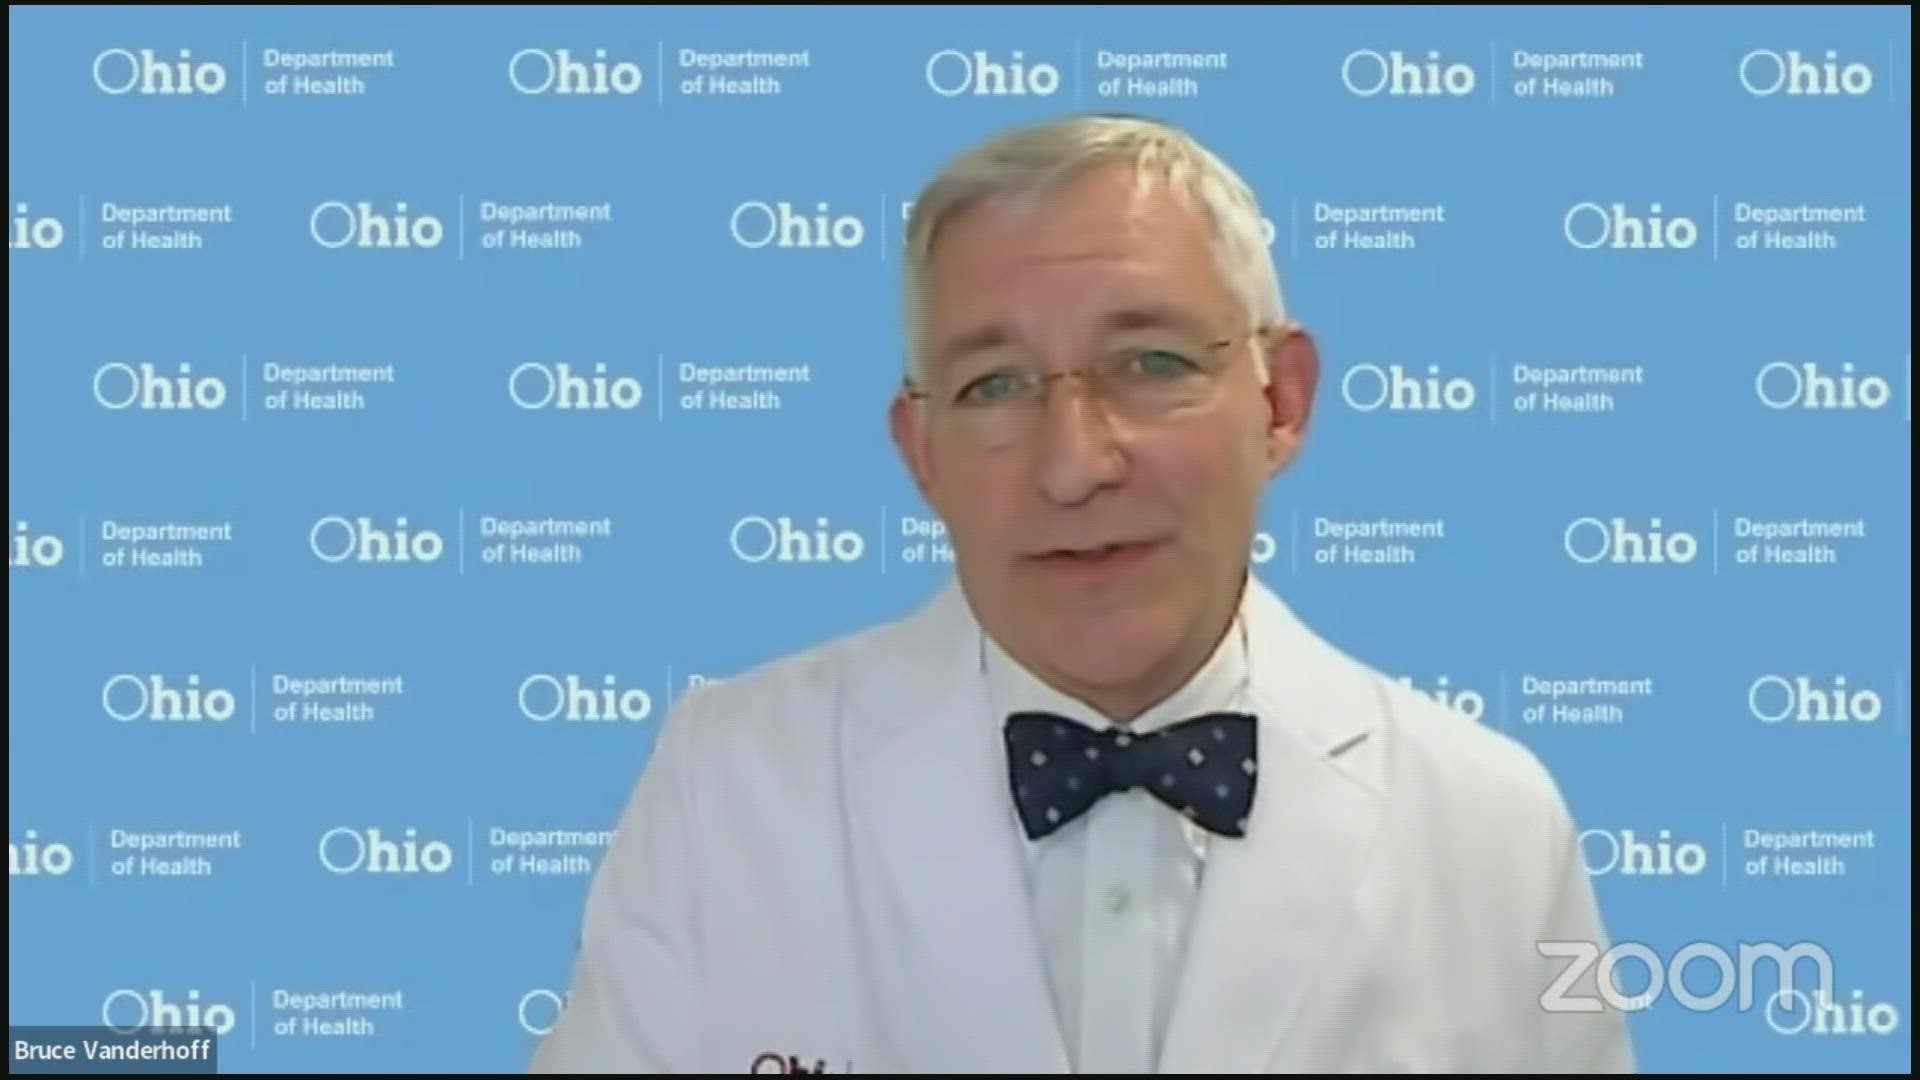 Ohio Department of Health Director Dr. Bruce Vanderhoff said that he anticipated this year being a busy season for respiratory viruses.